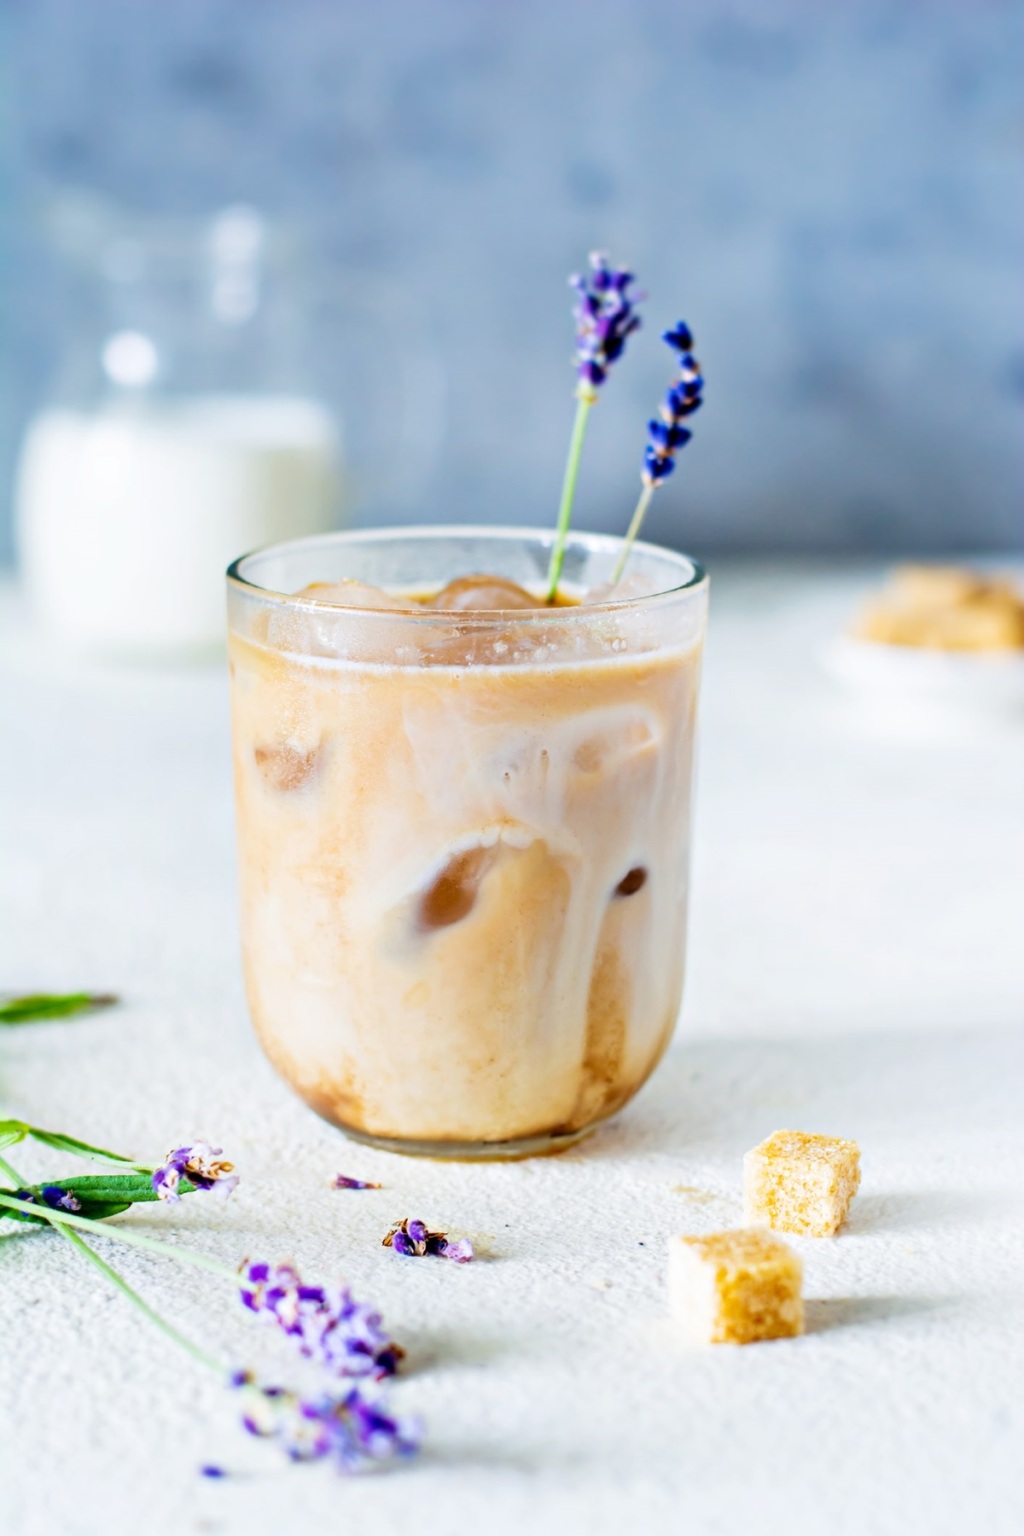 Treat Your Taste Buds: Why Flavored Coffee Blends Are the Ultimate Indulgence